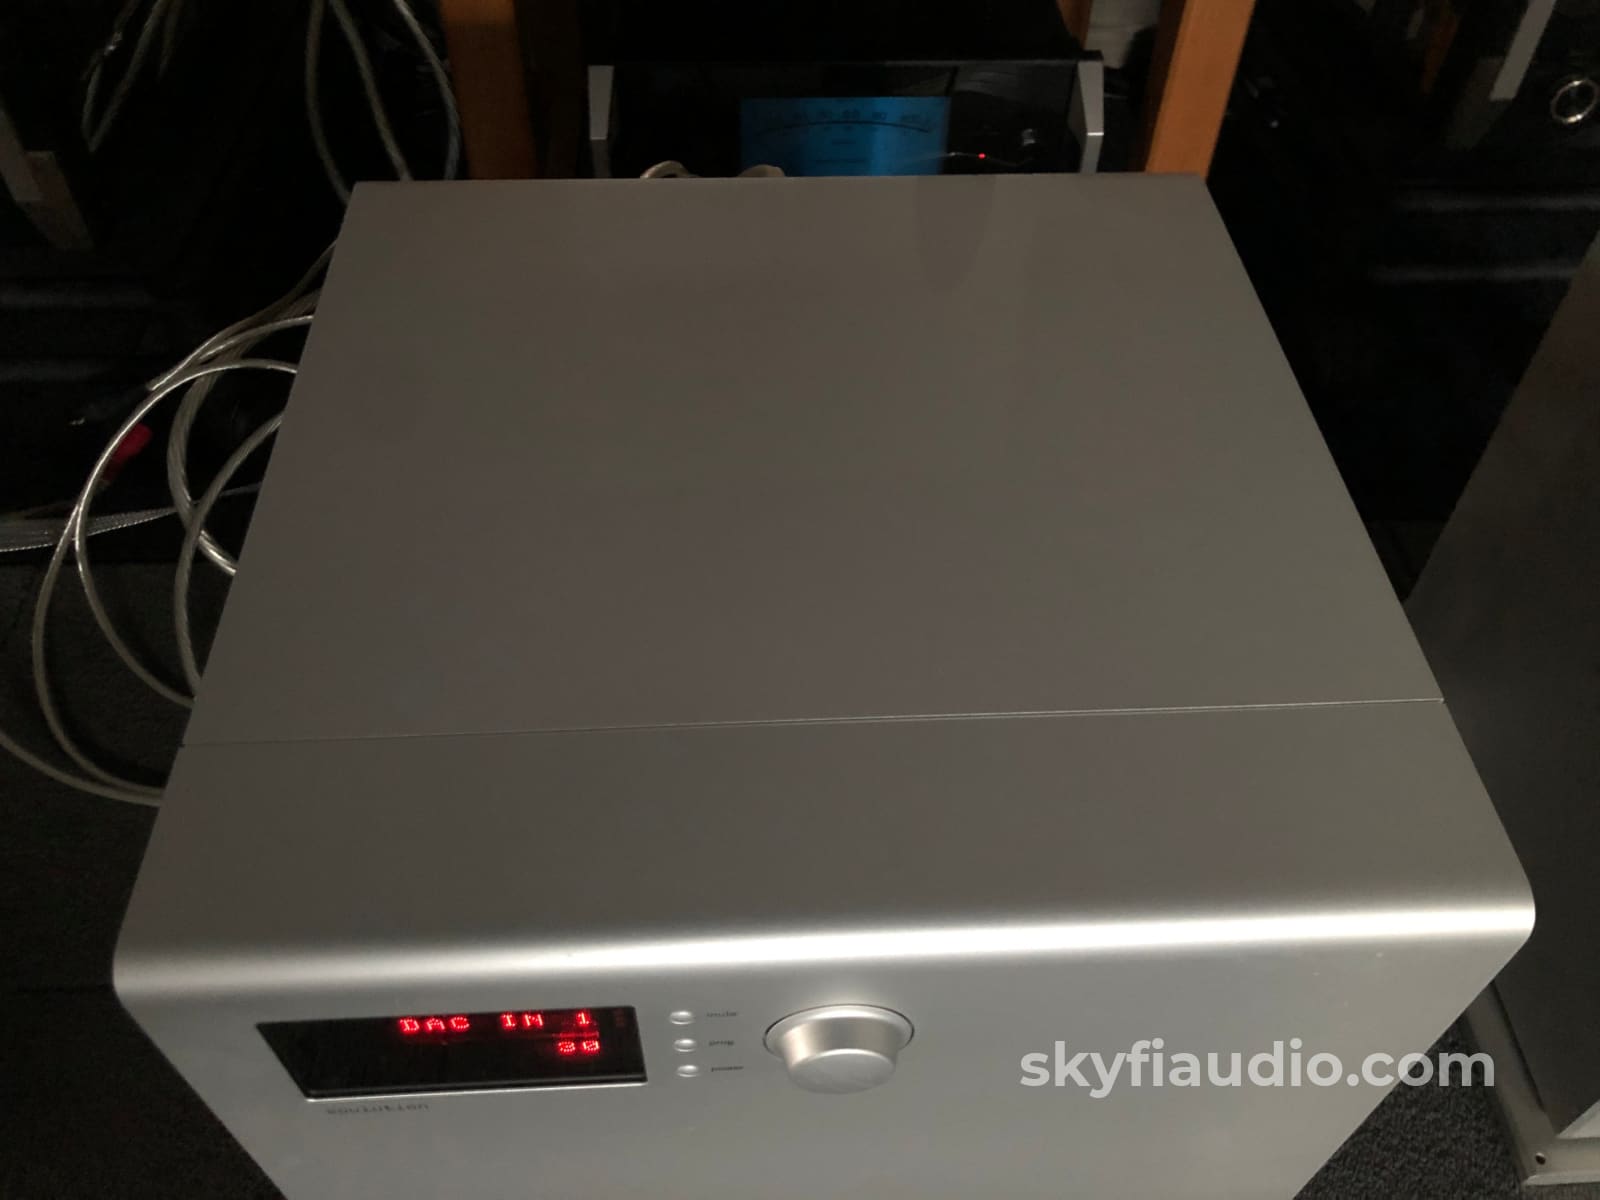 Soulution Audio 530 Integrated Amplifier With Phono! Like New $45K Msrp